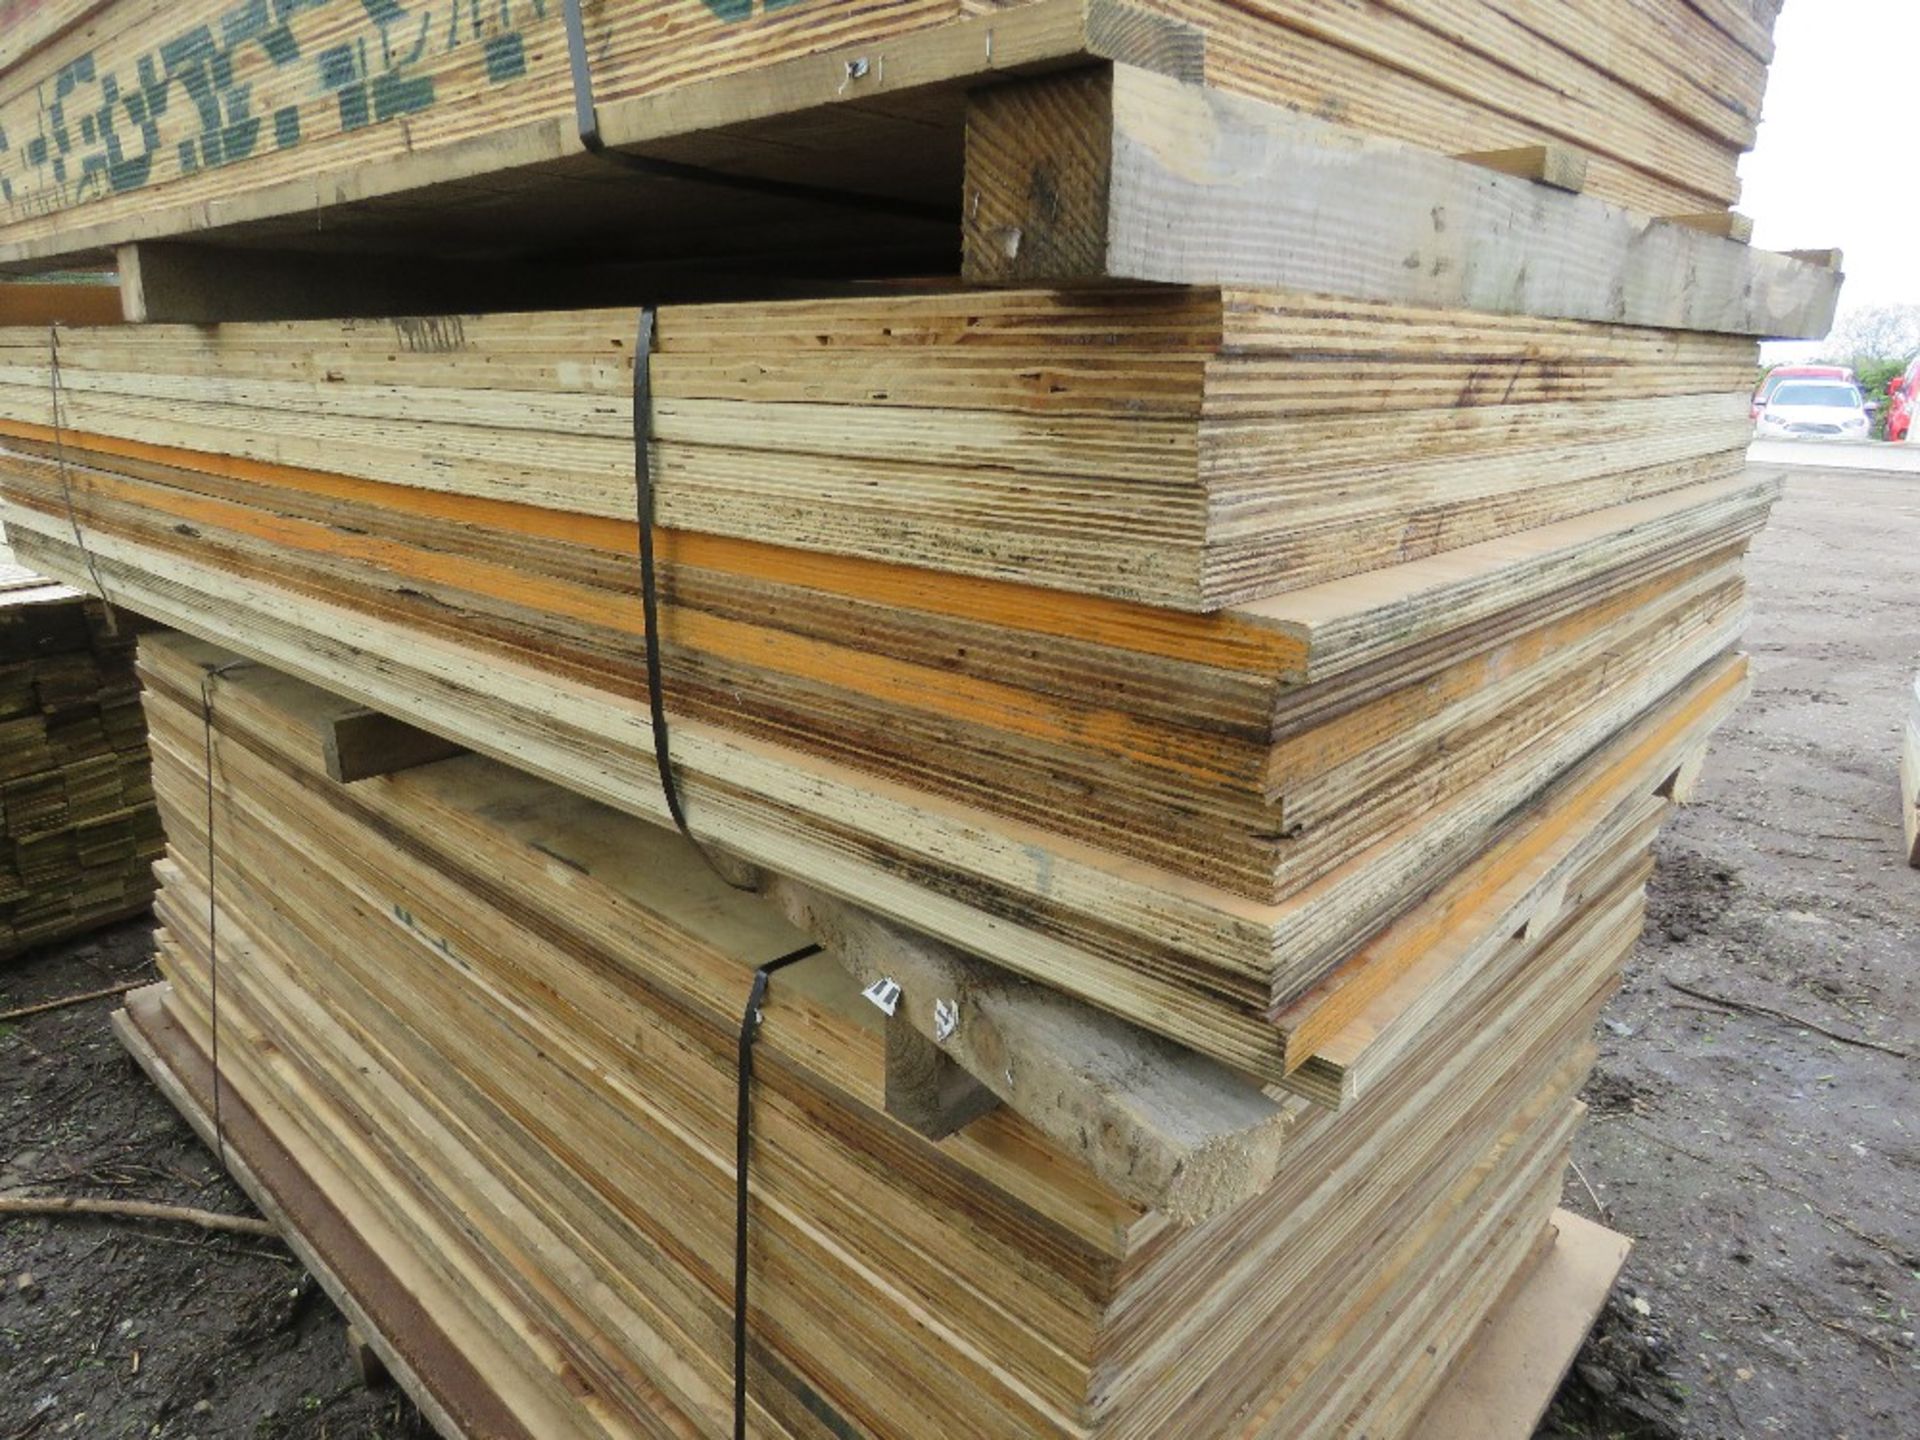 STACK OF APPROXIMATELY 14NO HEAVY DUTY 25-30MM APPROX PLYWOOD SHEETS 1.0M X 2.20M SIZE APPROX. - Image 4 of 4